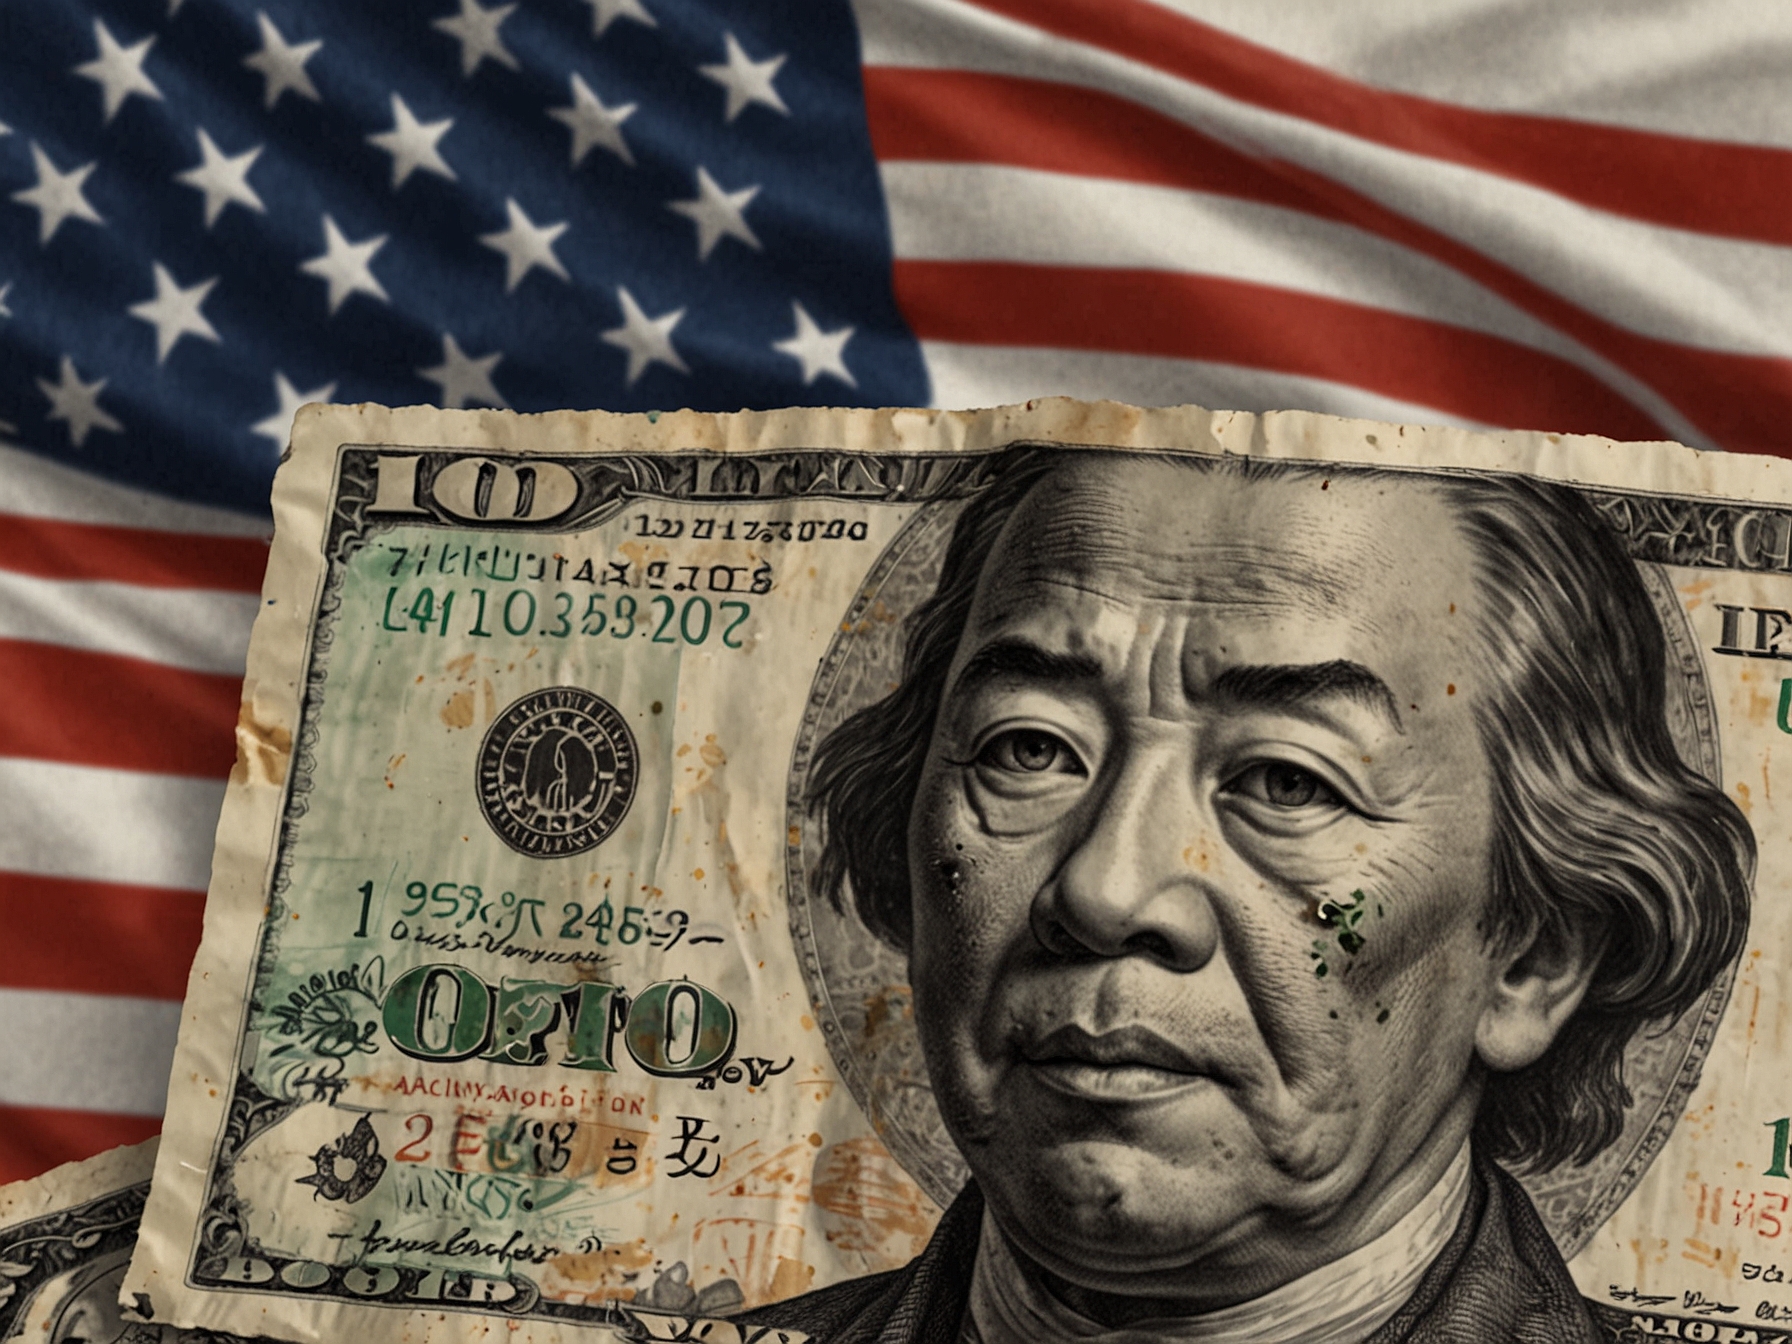 Depiction of a weakened yen against the US dollar, symbolizing the currency's depreciation and its impact on Japan's export sector and overall economic stability.